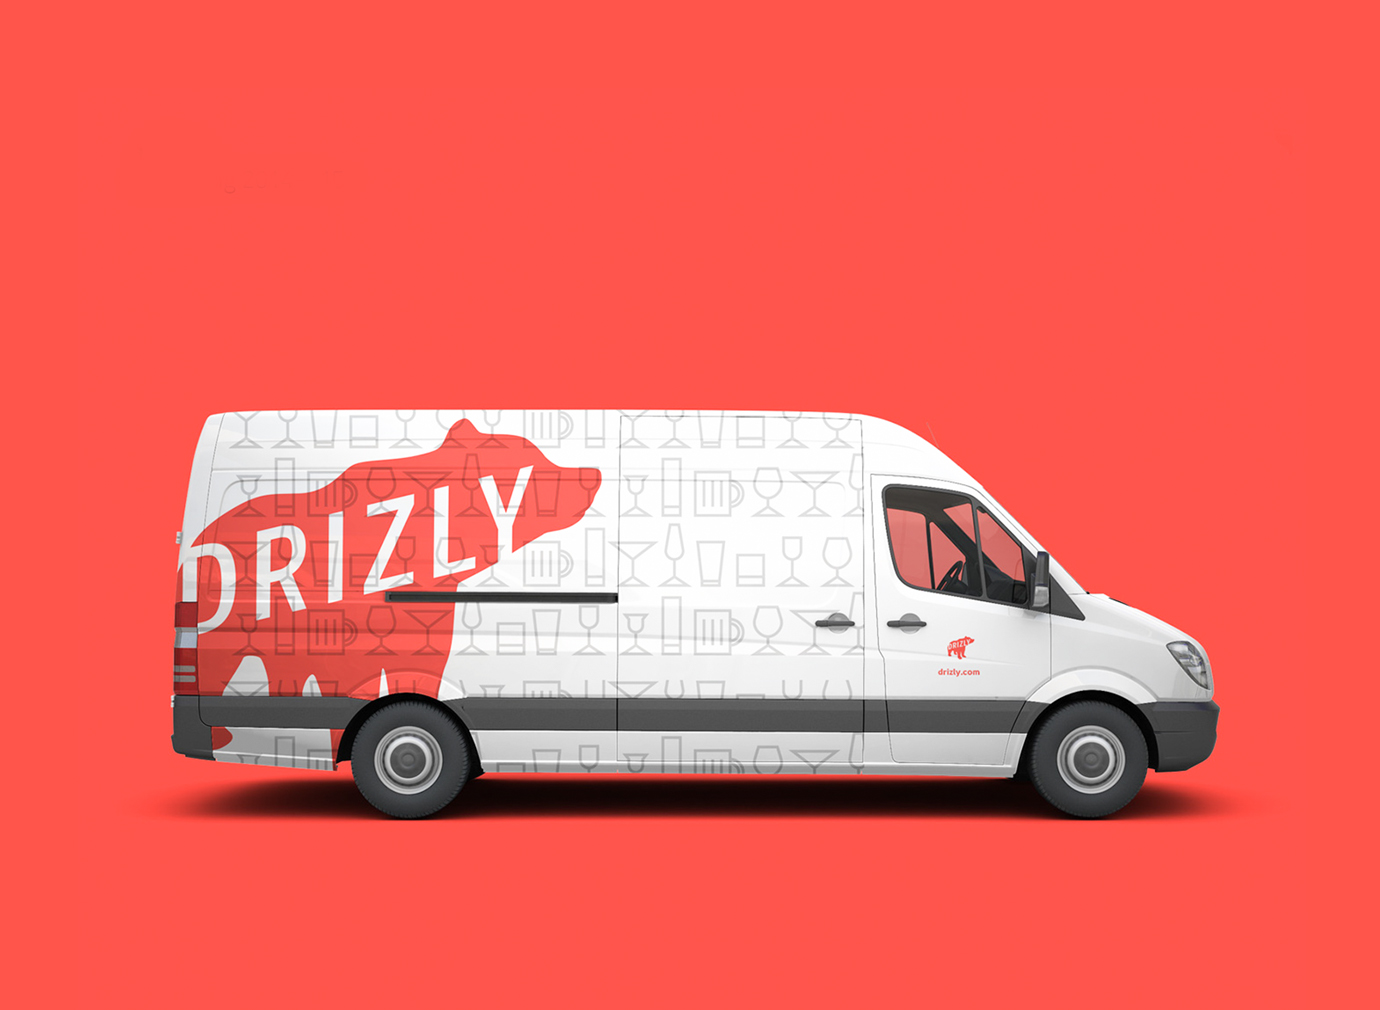 Drizly delivery van displaying it's logo and contemporary graphics